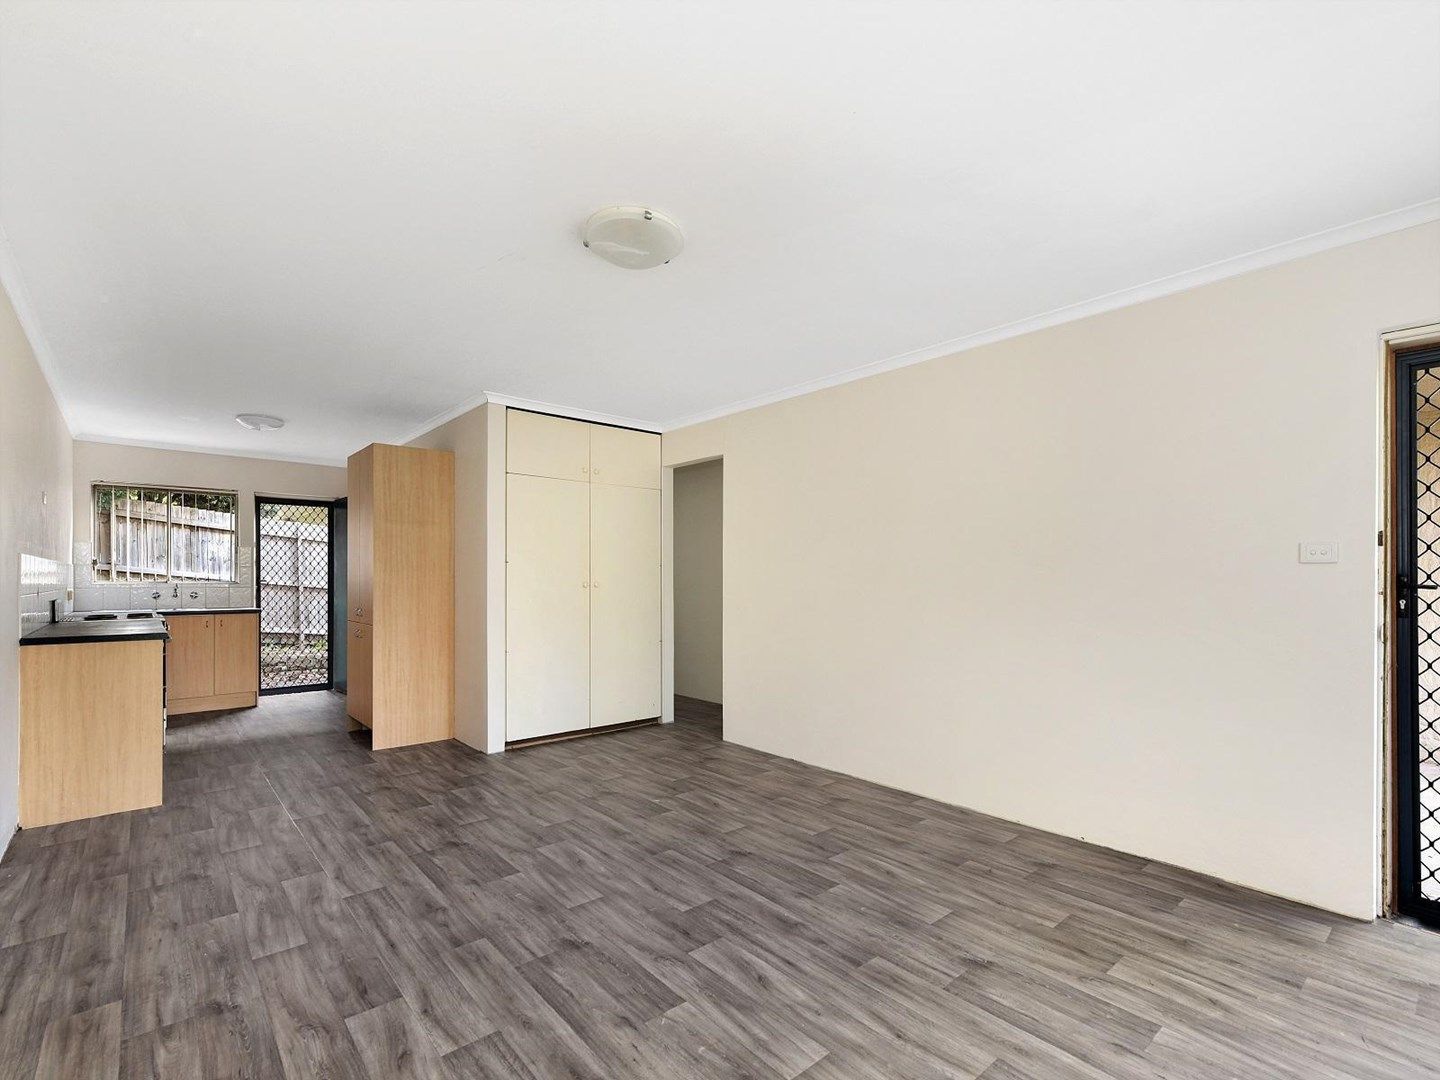 2 bedrooms Apartment / Unit / Flat in 4/66 Willoughby Road TERRIGAL NSW, 2260